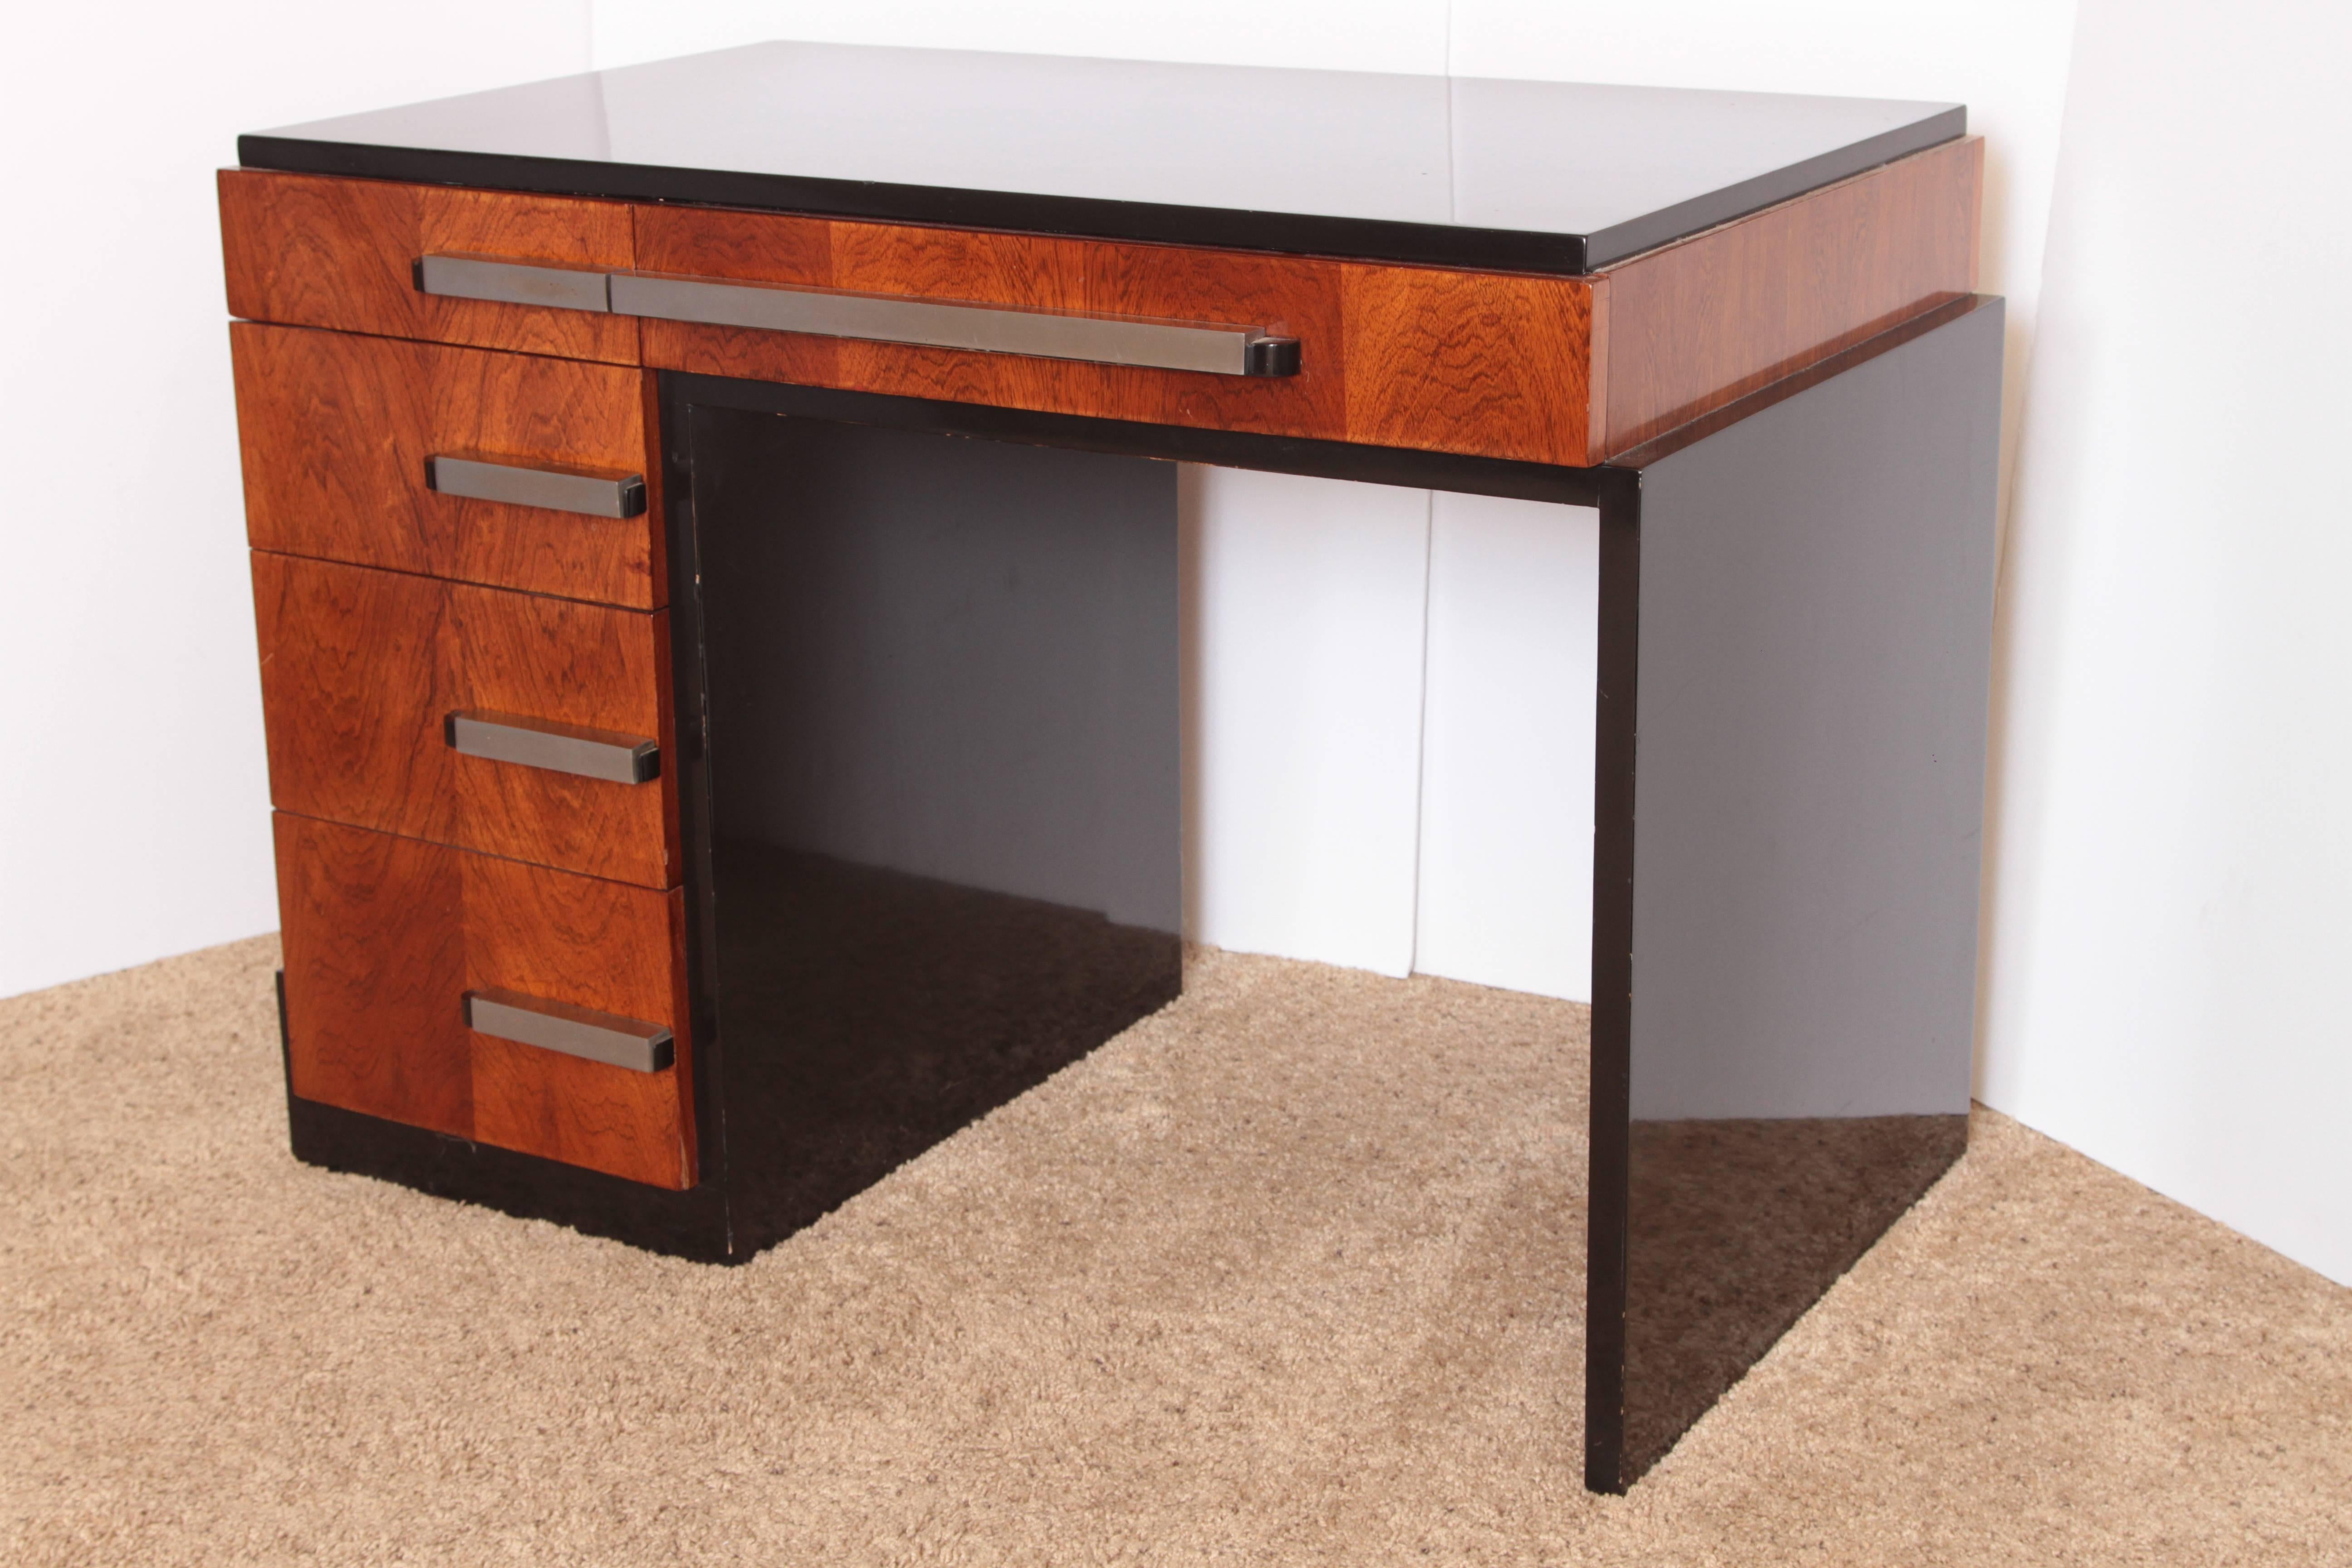 Machine Age Art Deco Donald Deskey for Widdicomb Asymmetric Desk
PRICE REDUCED

One of Deskey's most masculine offset - rectilinear designs.
Superb contrast with Black Lacquer and nicely figured Walnut Burl, cast Monel / Aluminum handles and